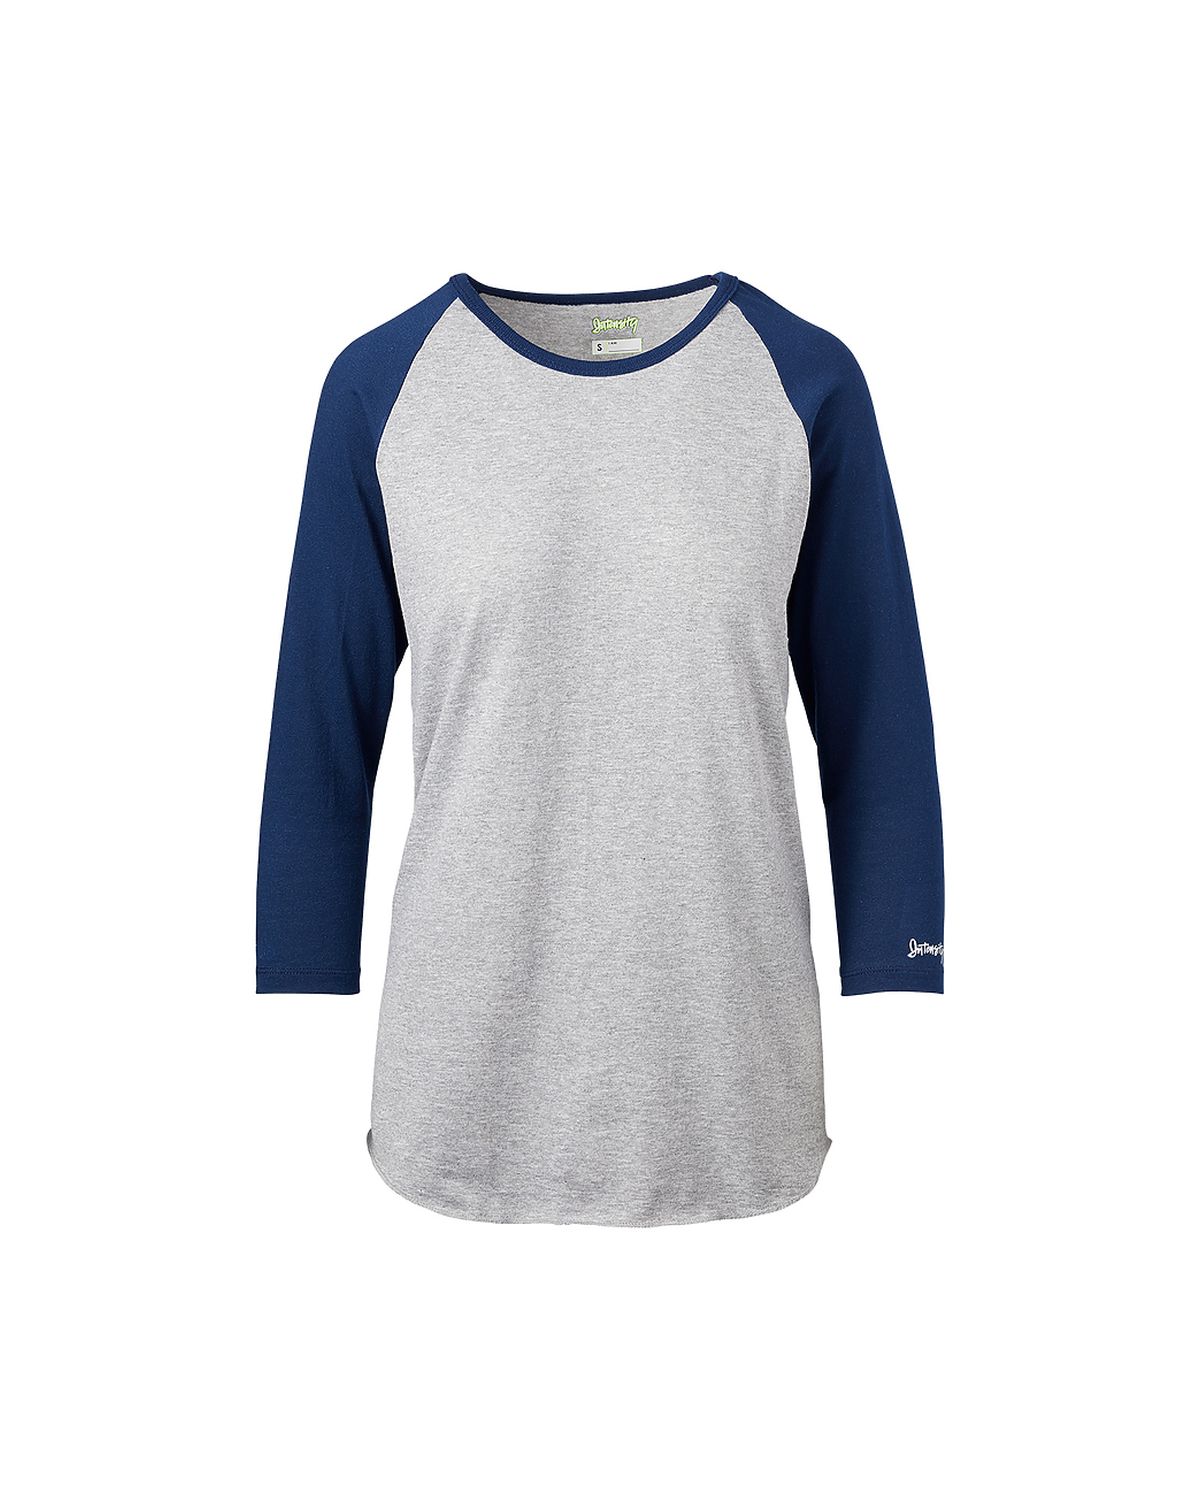 'Soffe Intensity N210W Womens Fastpitched Heathered Tee'